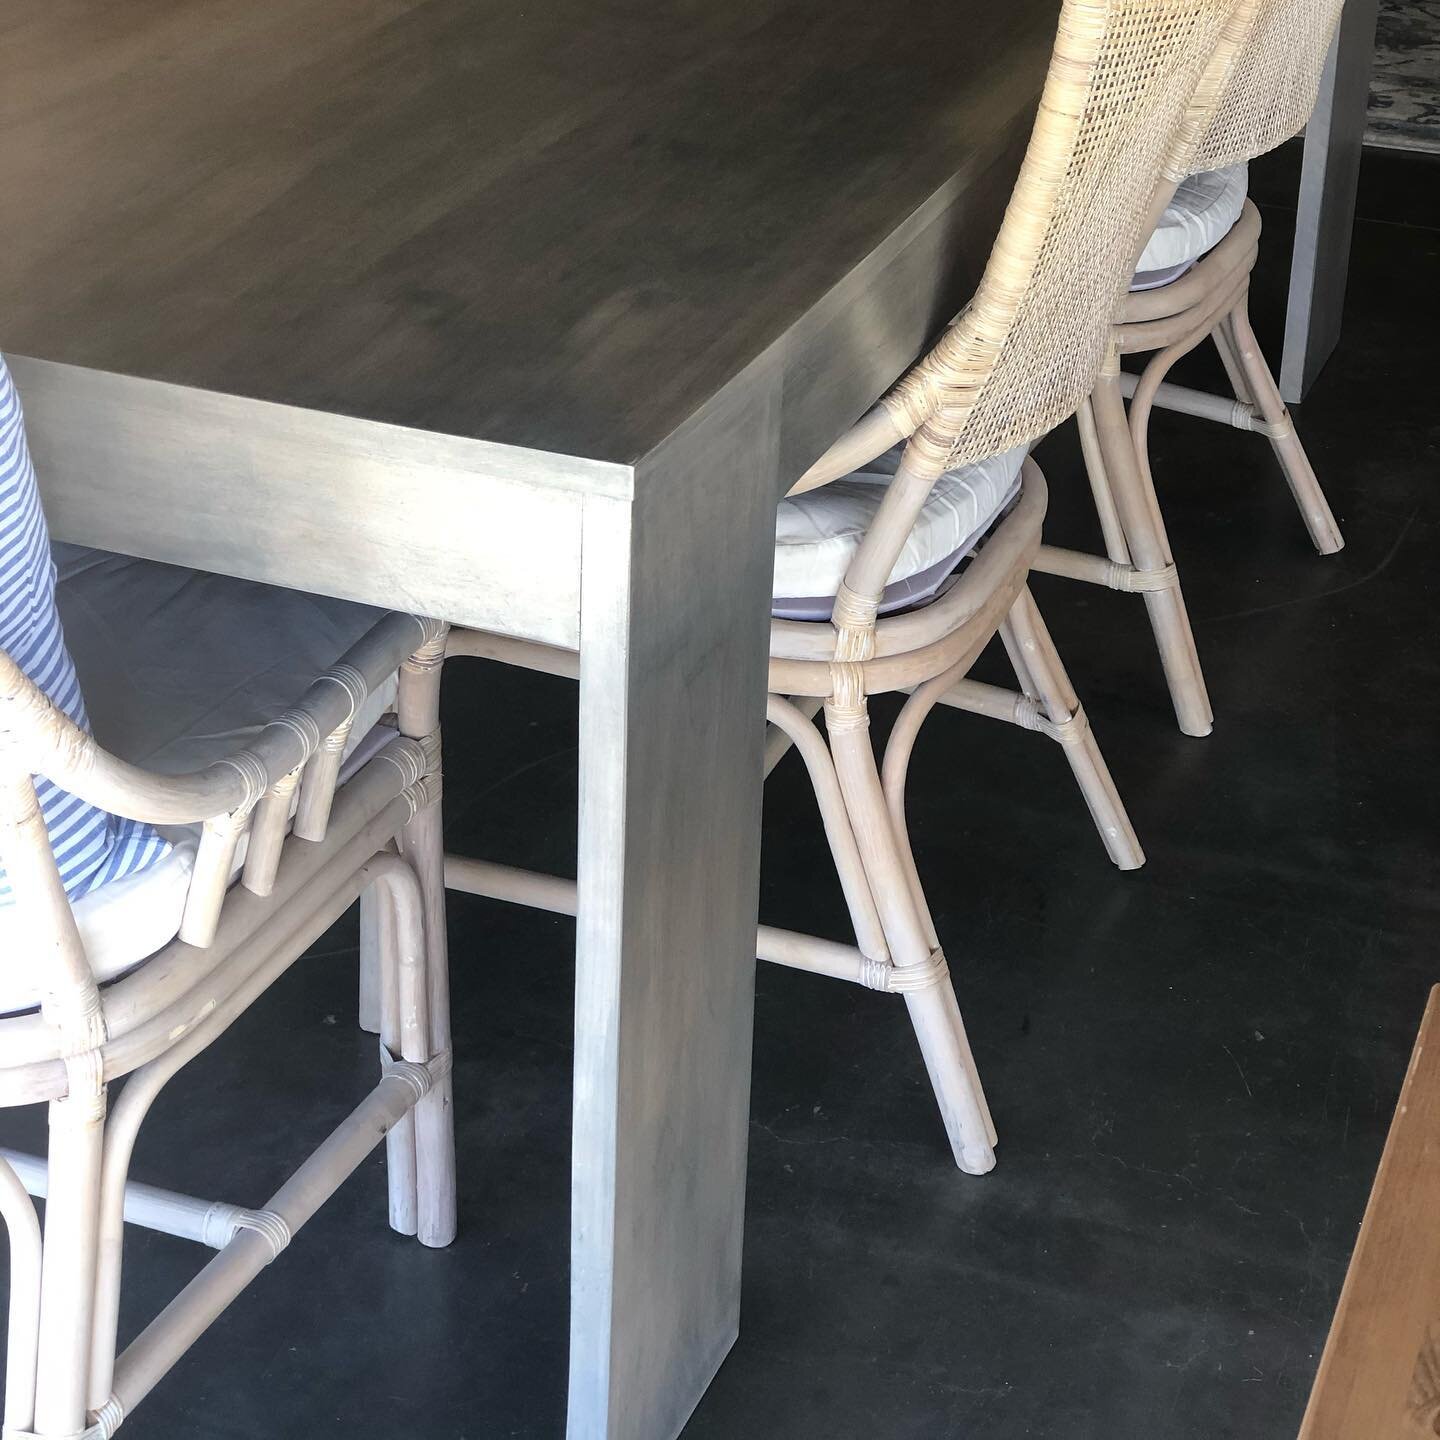 Spruce up your dining area with our weathered gray wash modern farmhouse table. Sleek tapered legs and a solid maple top, this table is perfect for family diners and all of this falls #wfh / #sfh sessions 🍂🌾🍁🐿 #farmhouse #diningtable